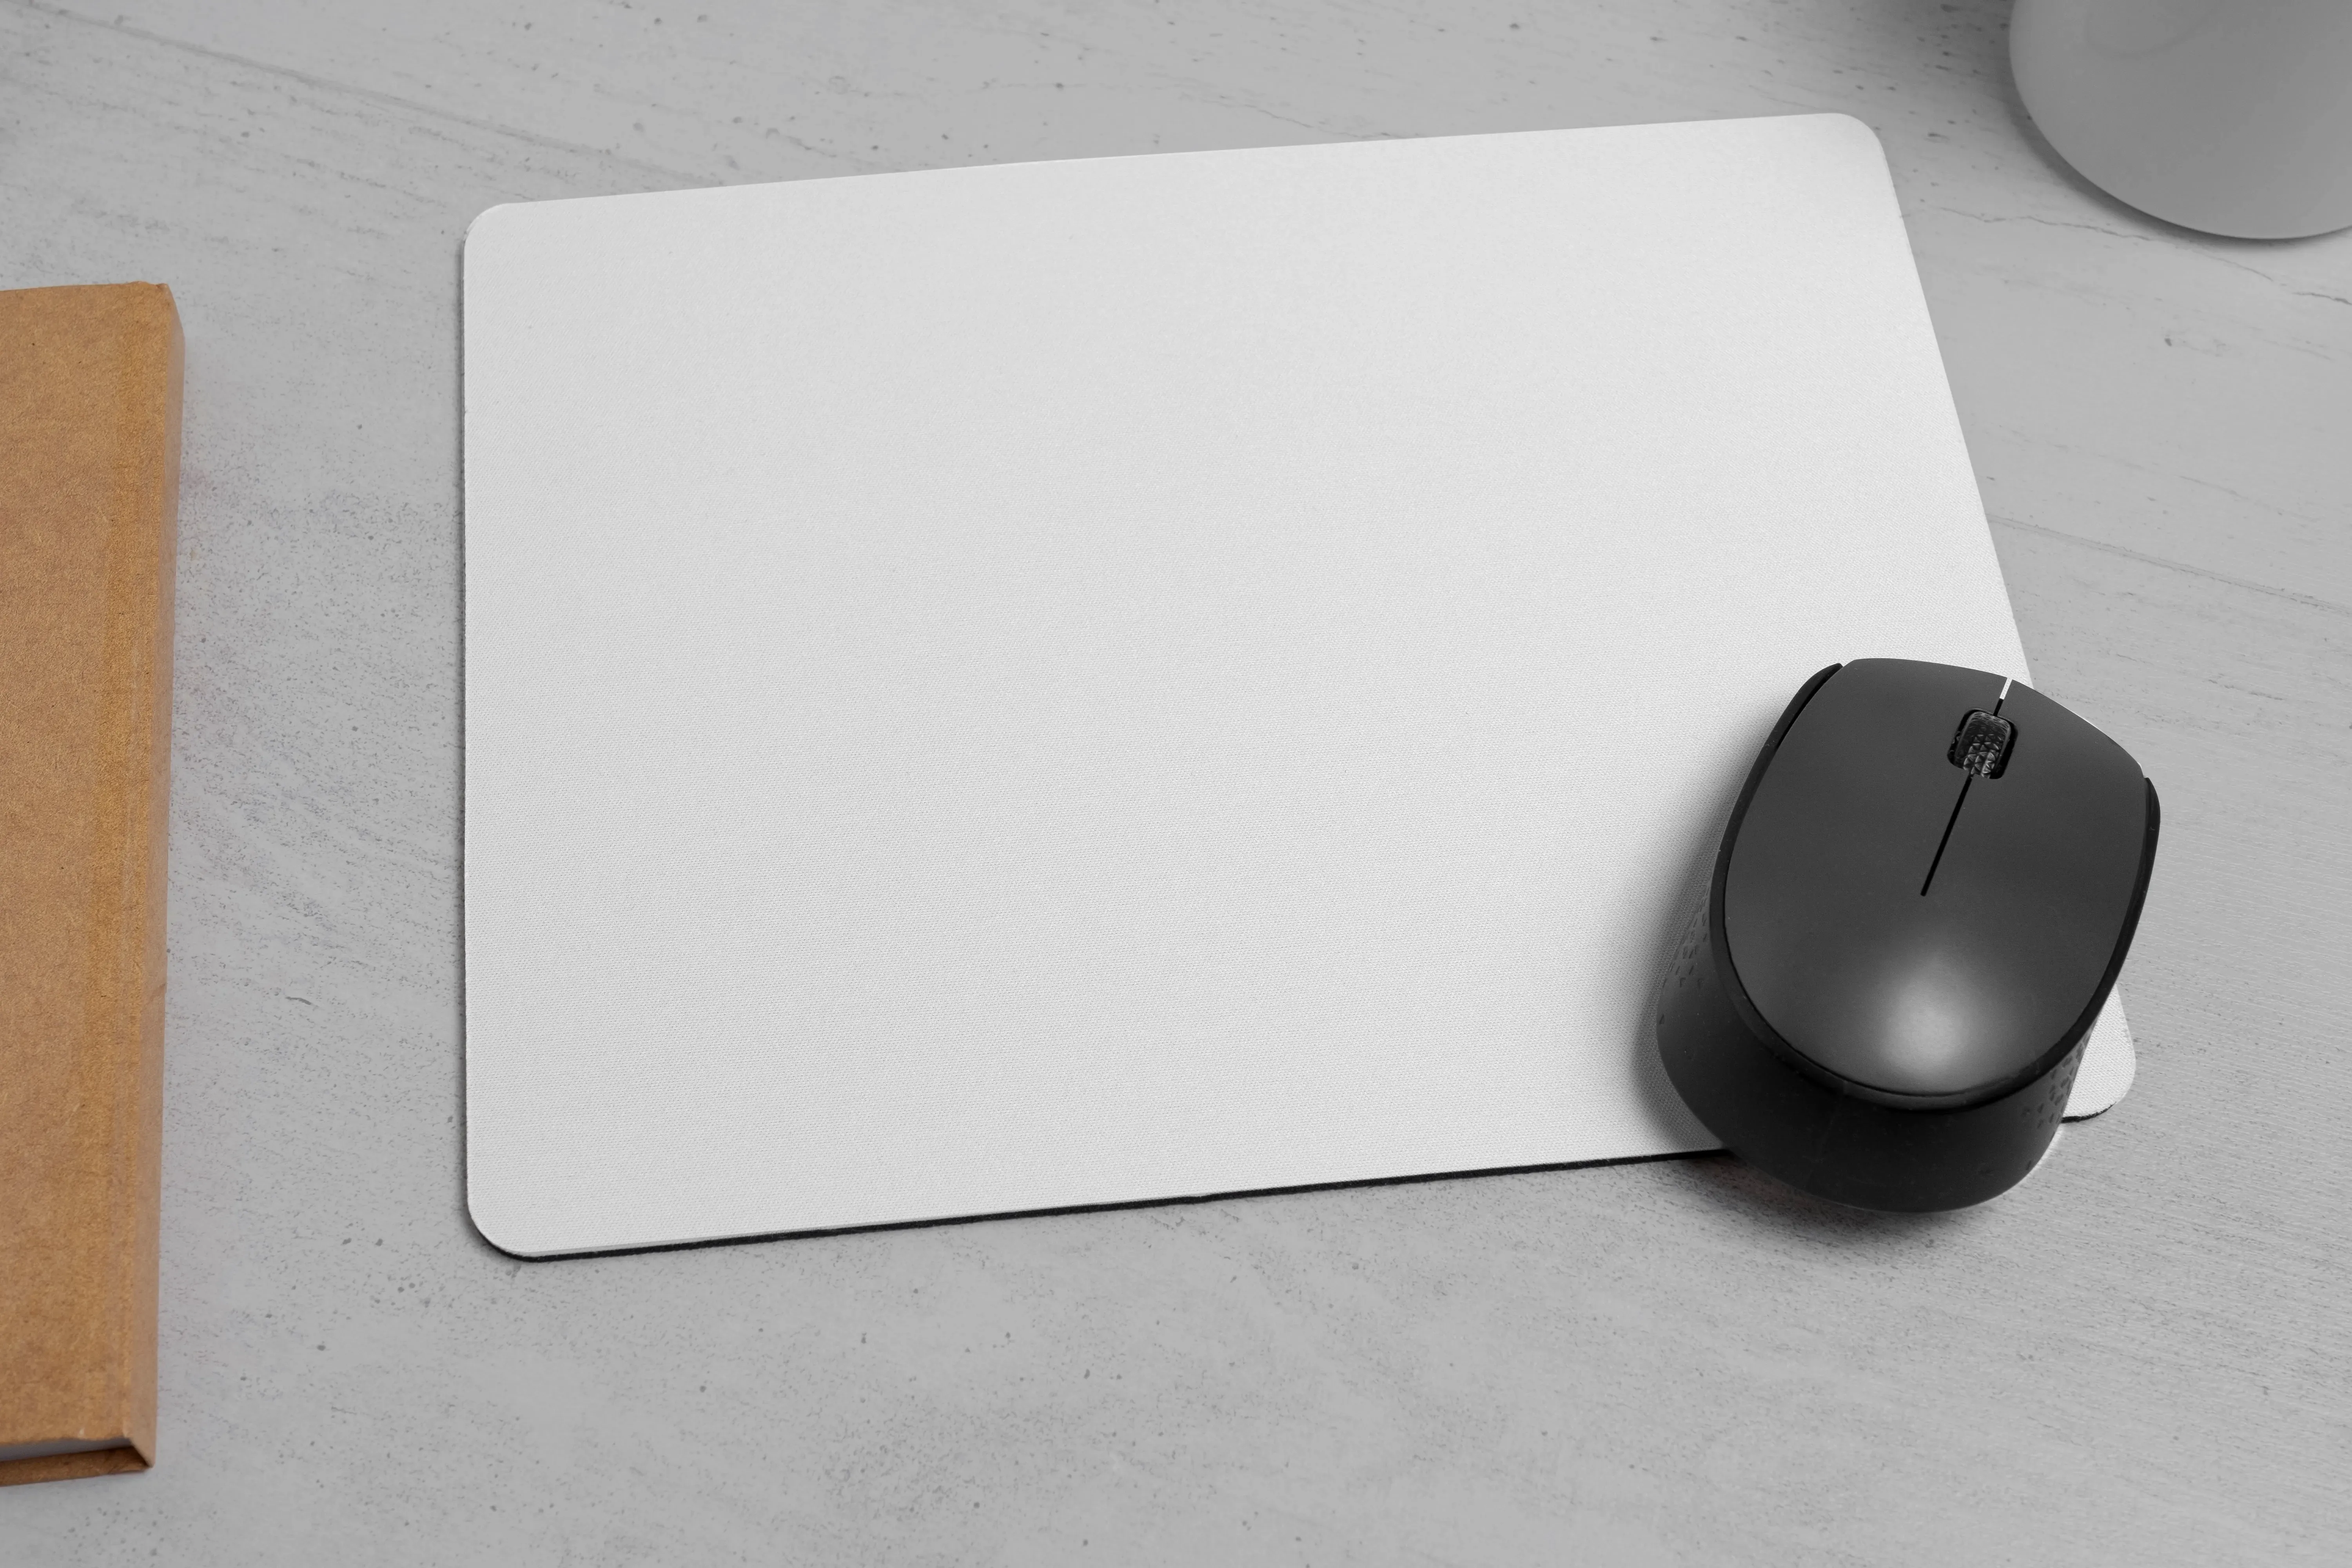 Top view of mouse pad mockup